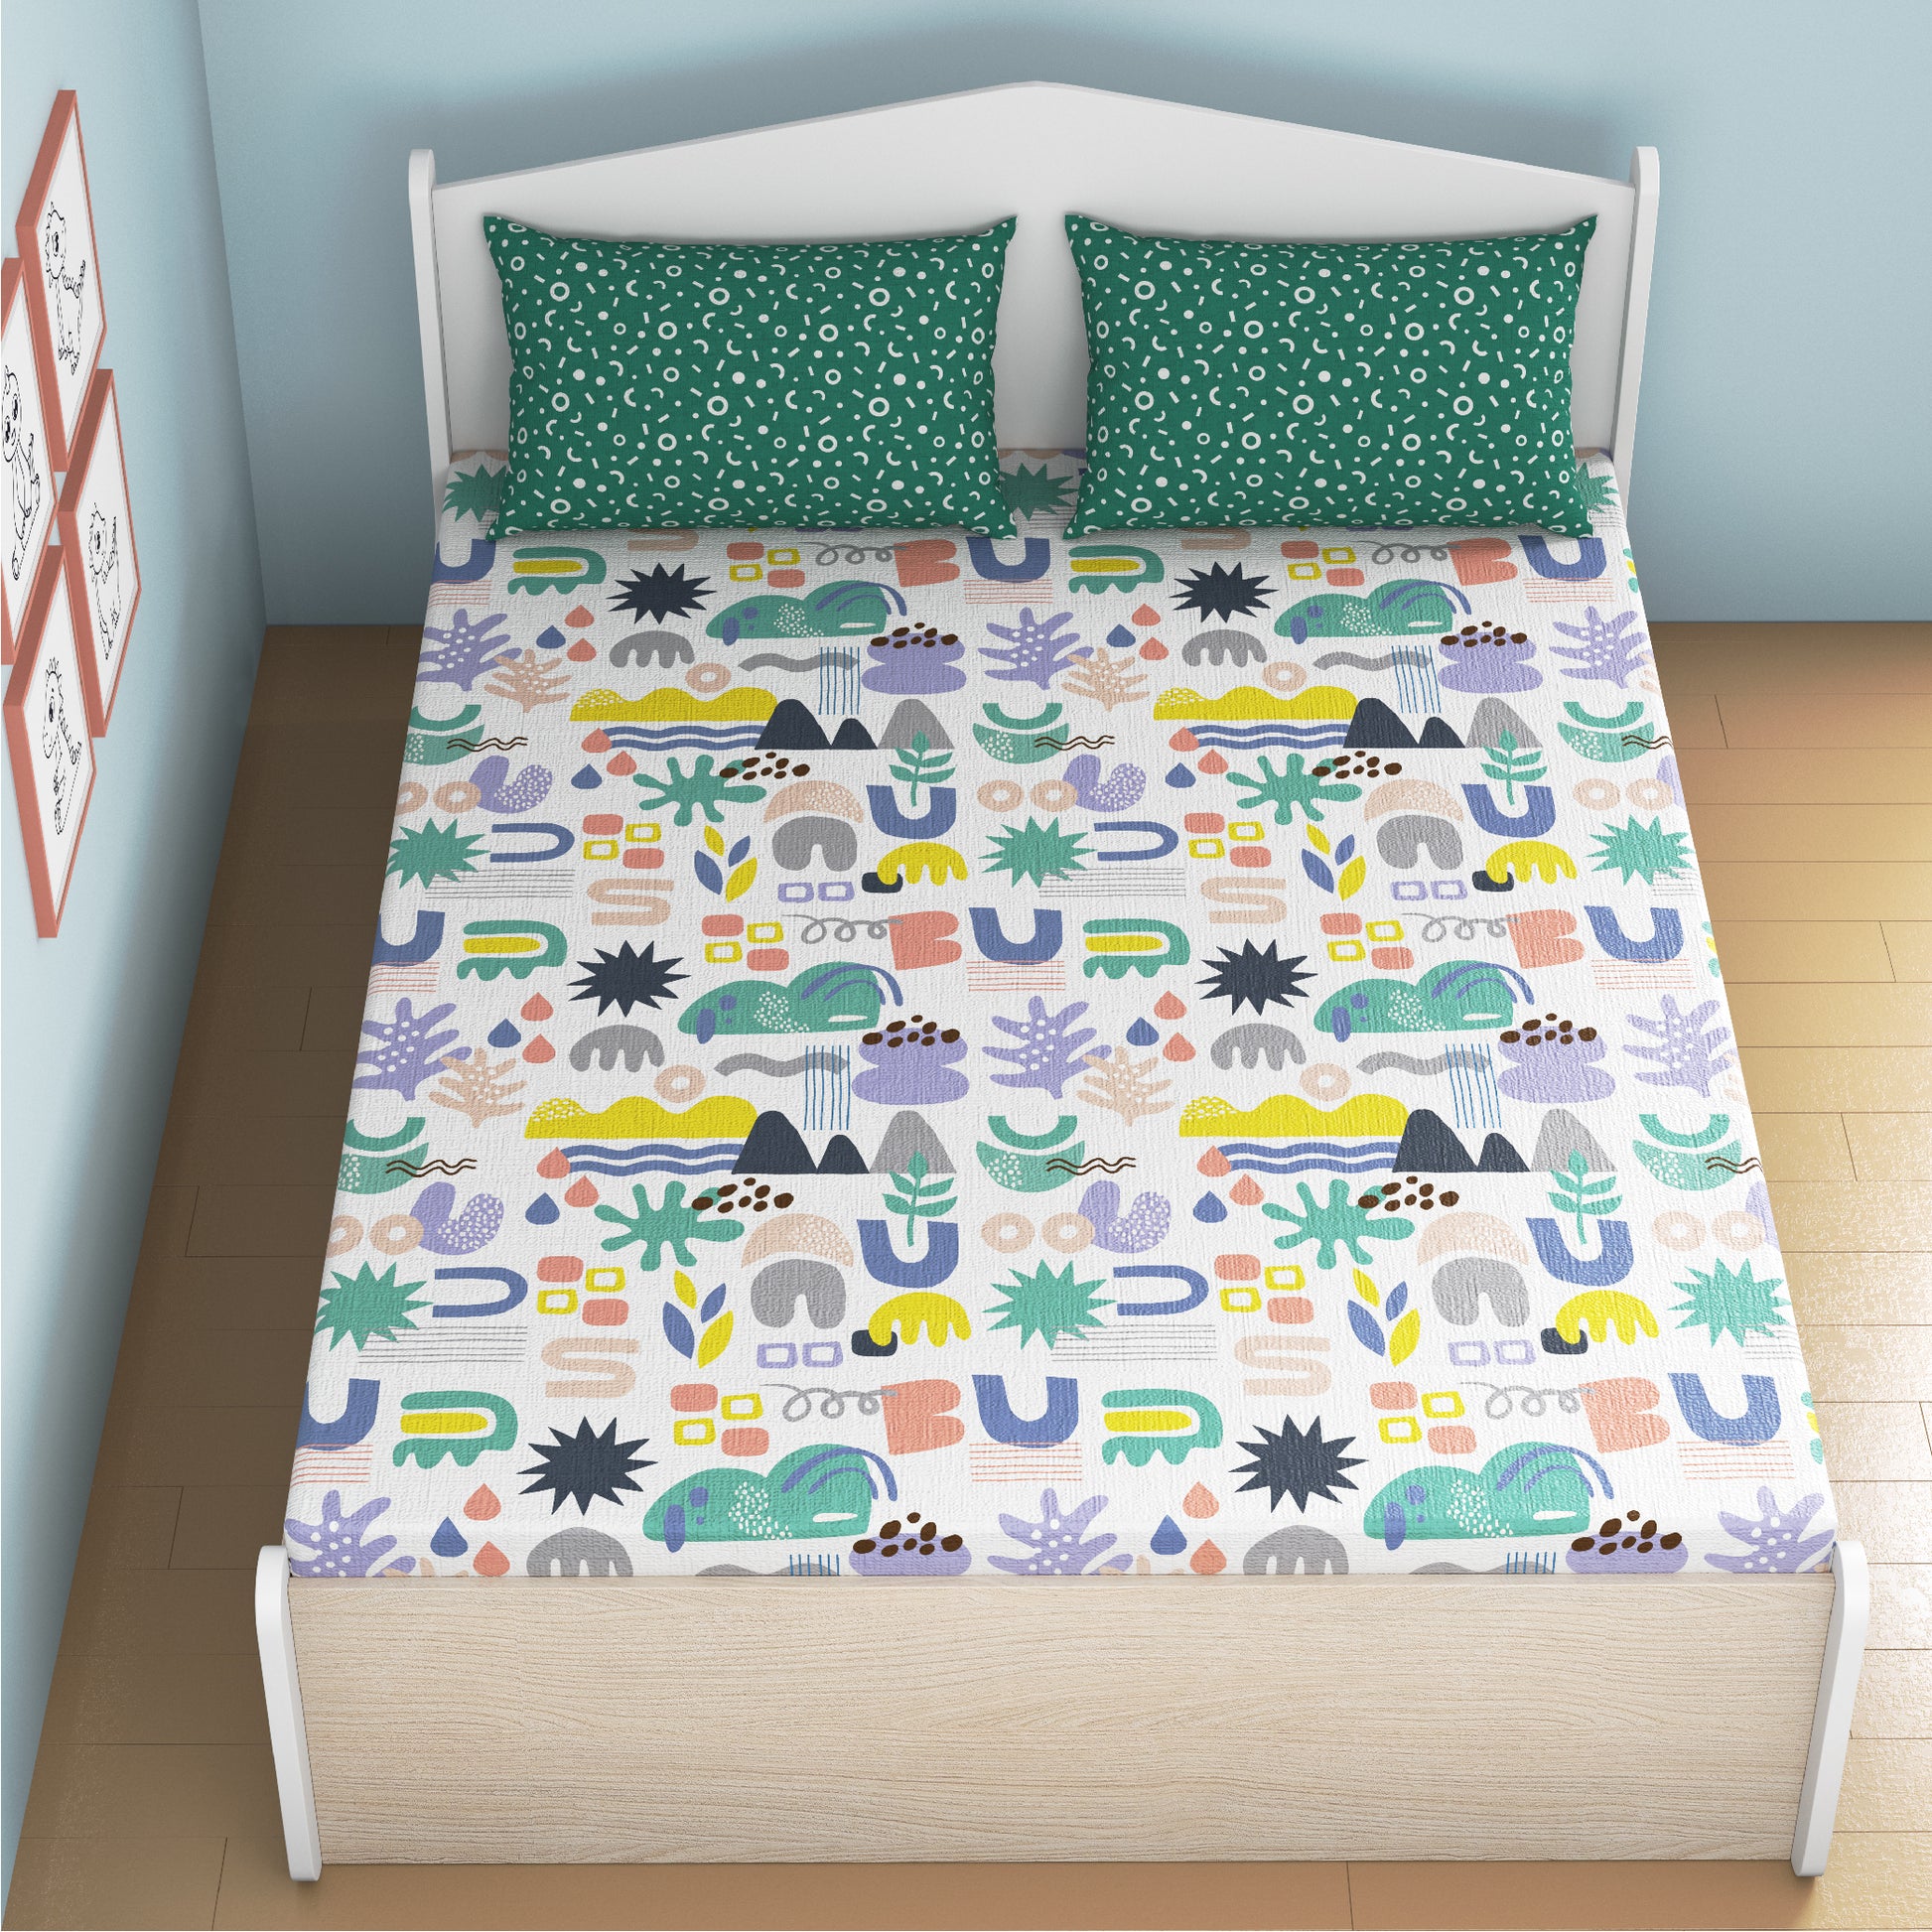 media_gallary Oodles of Doodles Fitted Bedsheet 2